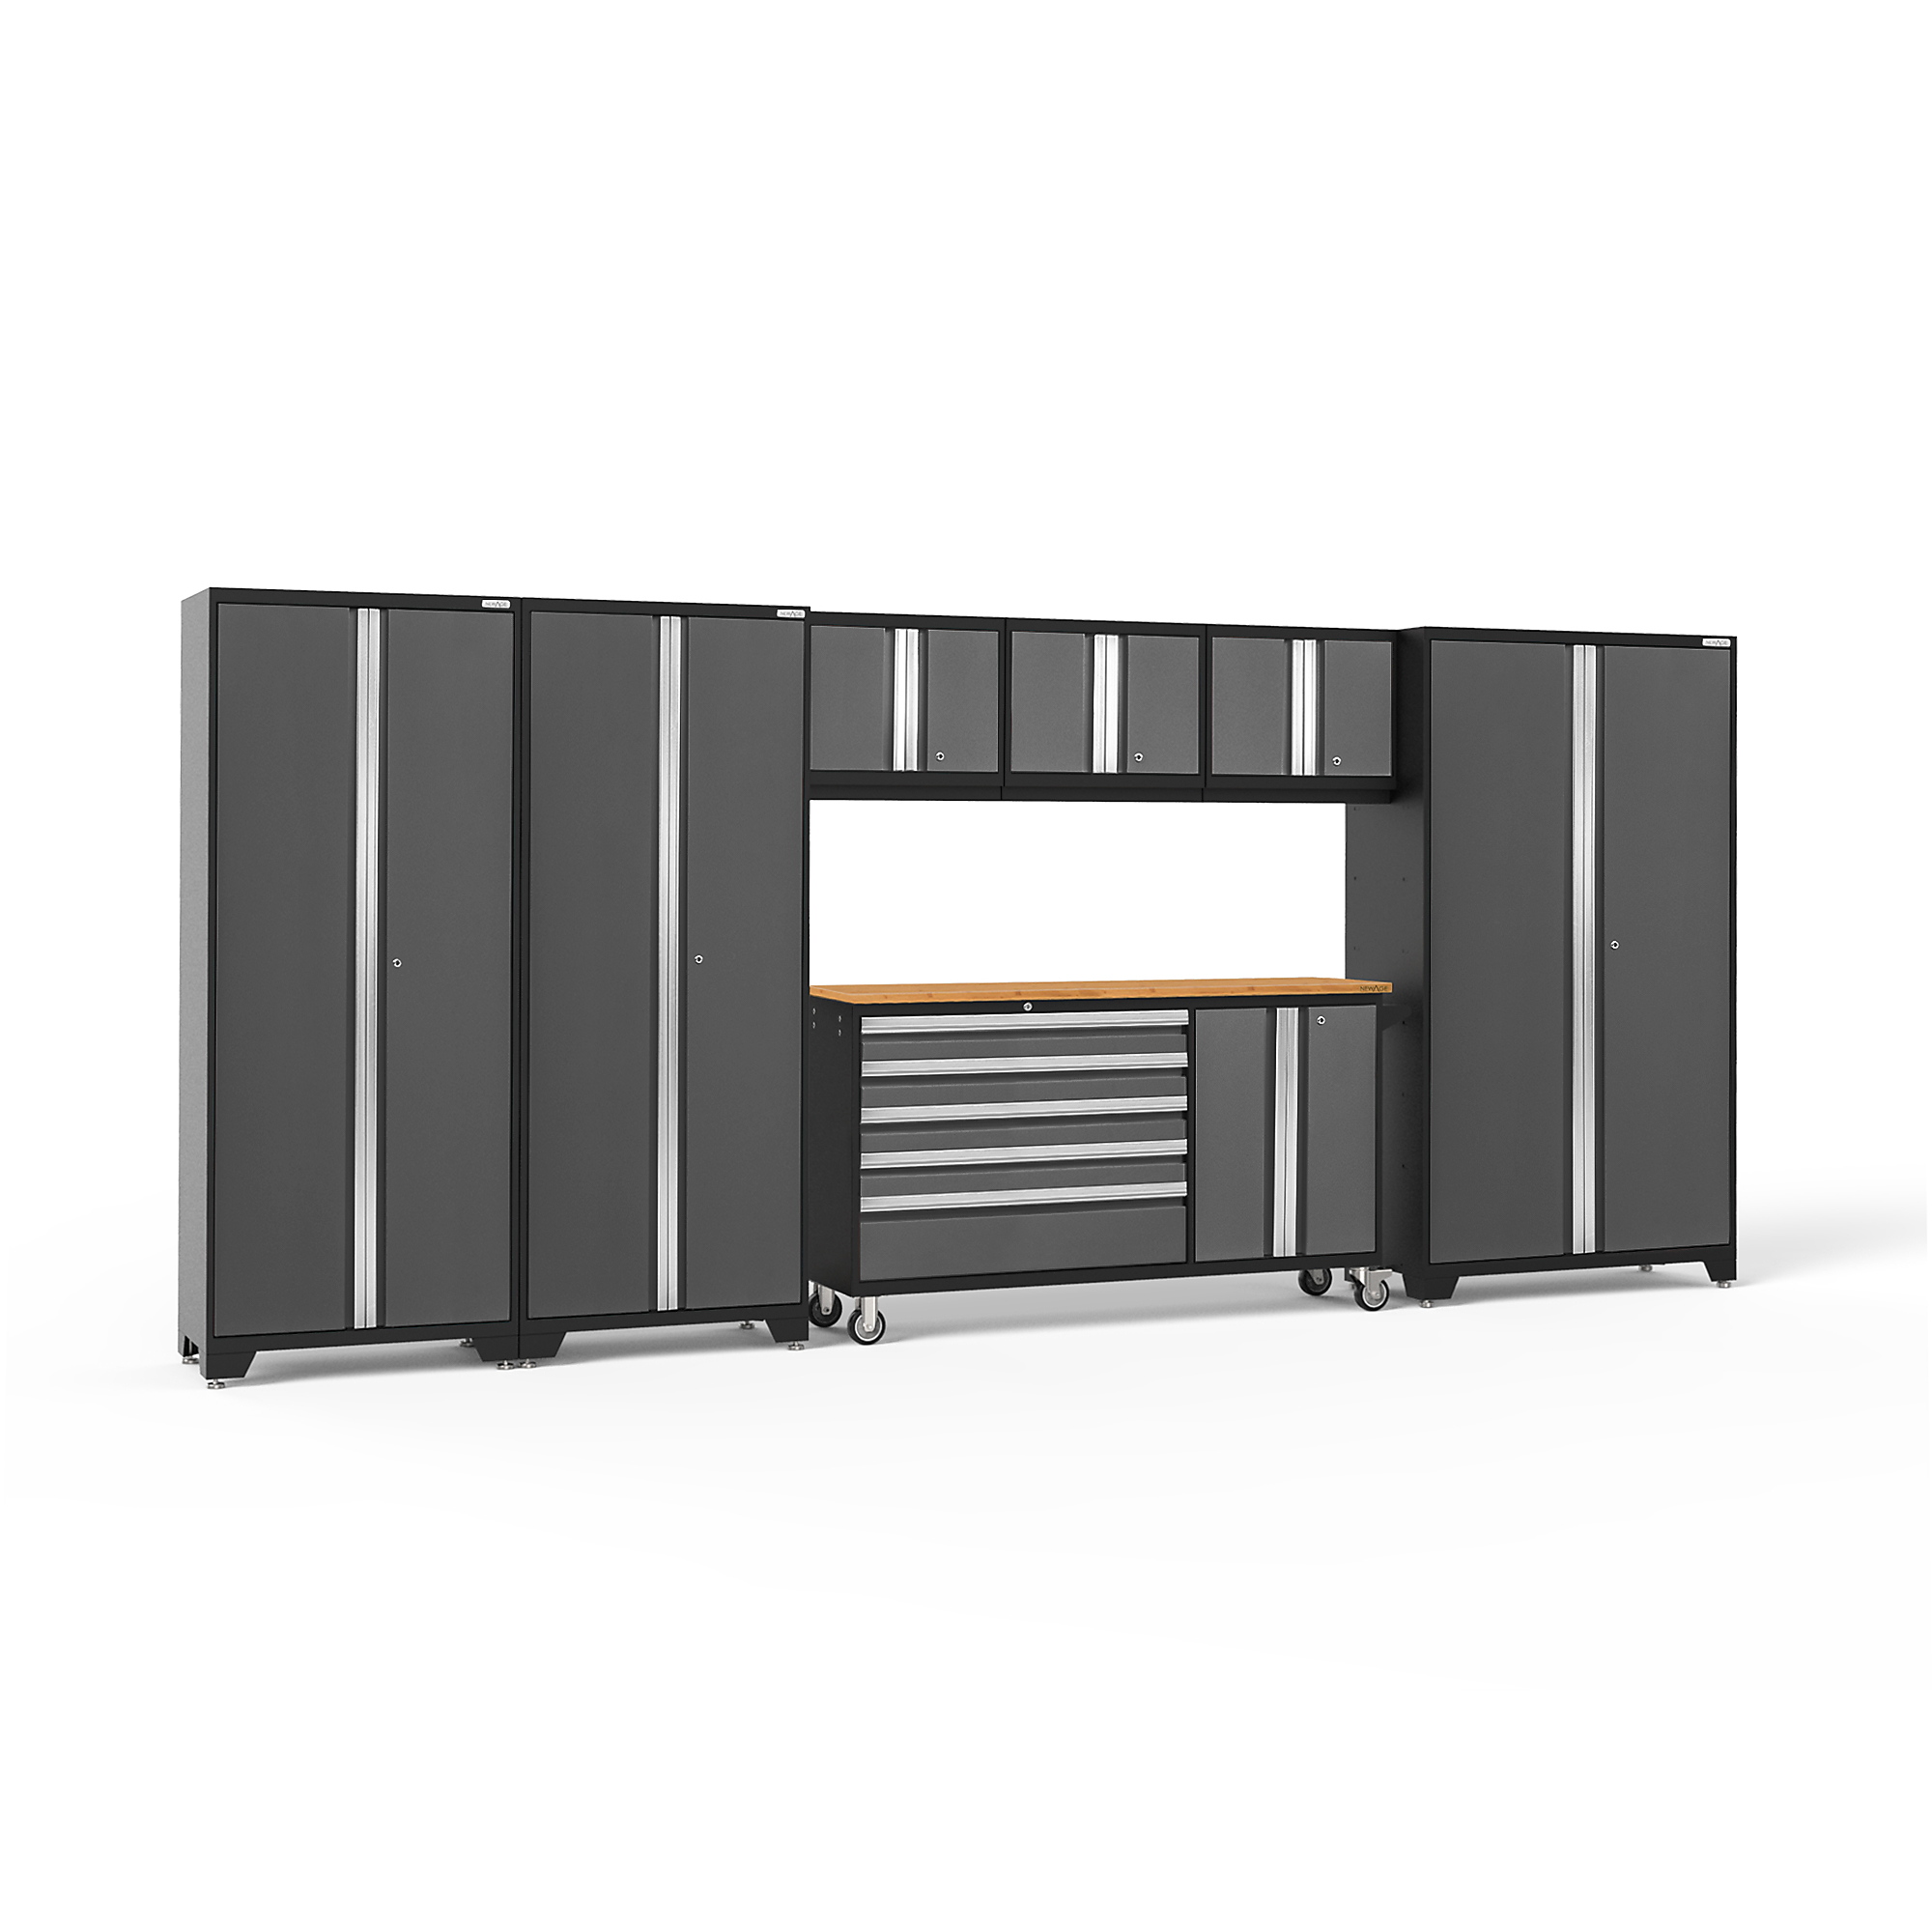 NewAge Products, Bold Series Gray 7-Piece Steel Garage Cabinet Set, Width 174 in, Height 77.25 in, Depth 18 in, Model 50506